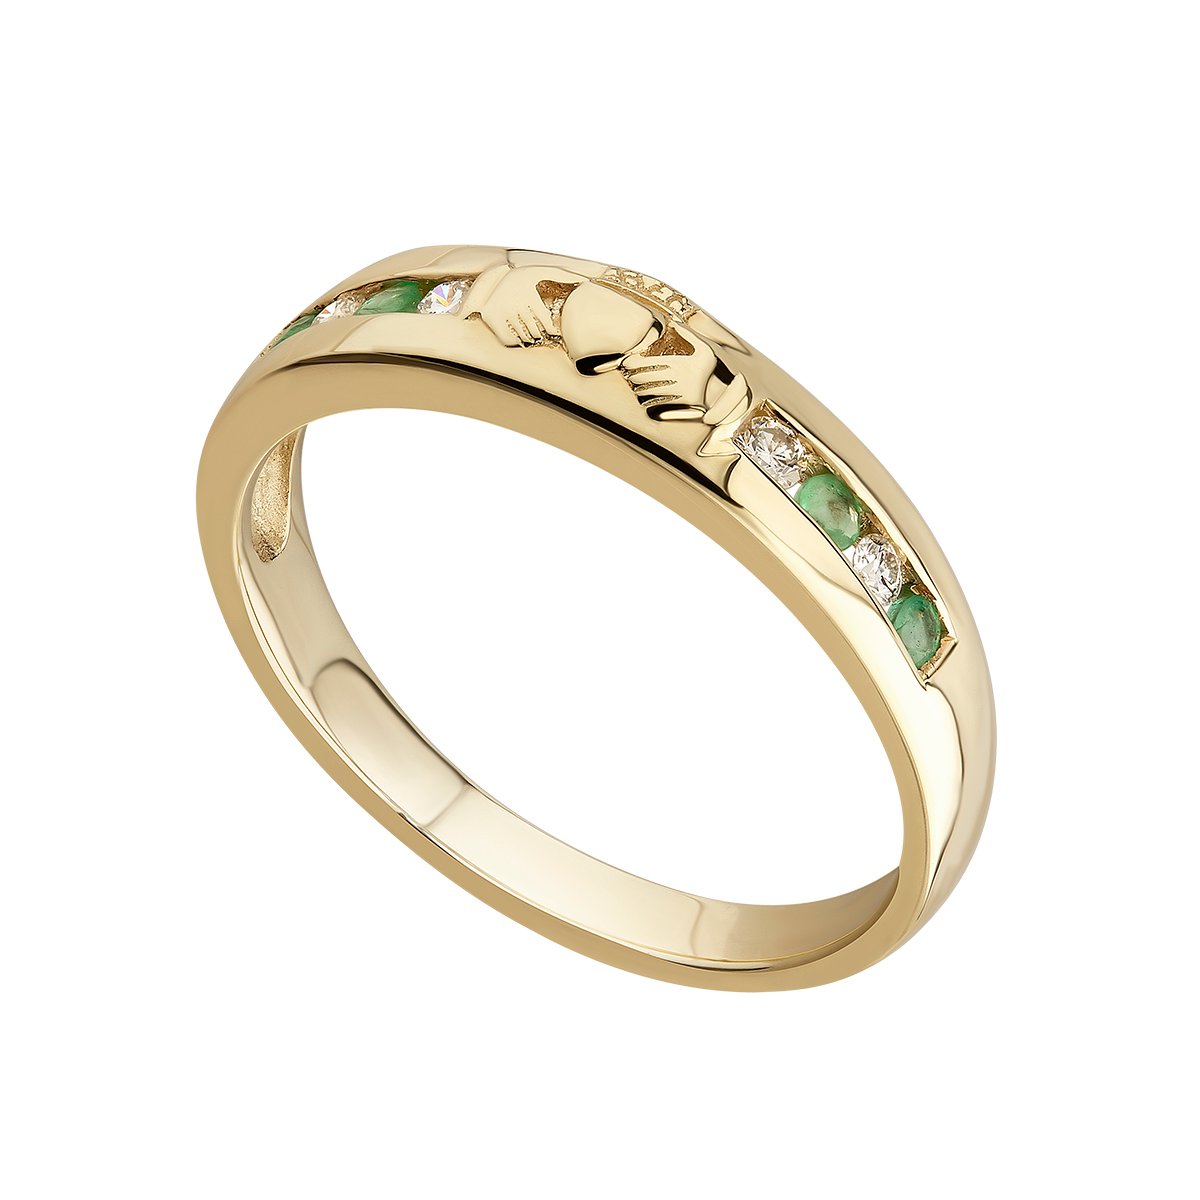 Product image for Claddagh Ring - Ladies 14k Gold with Diamonds and Emeralds Claddagh Eternity